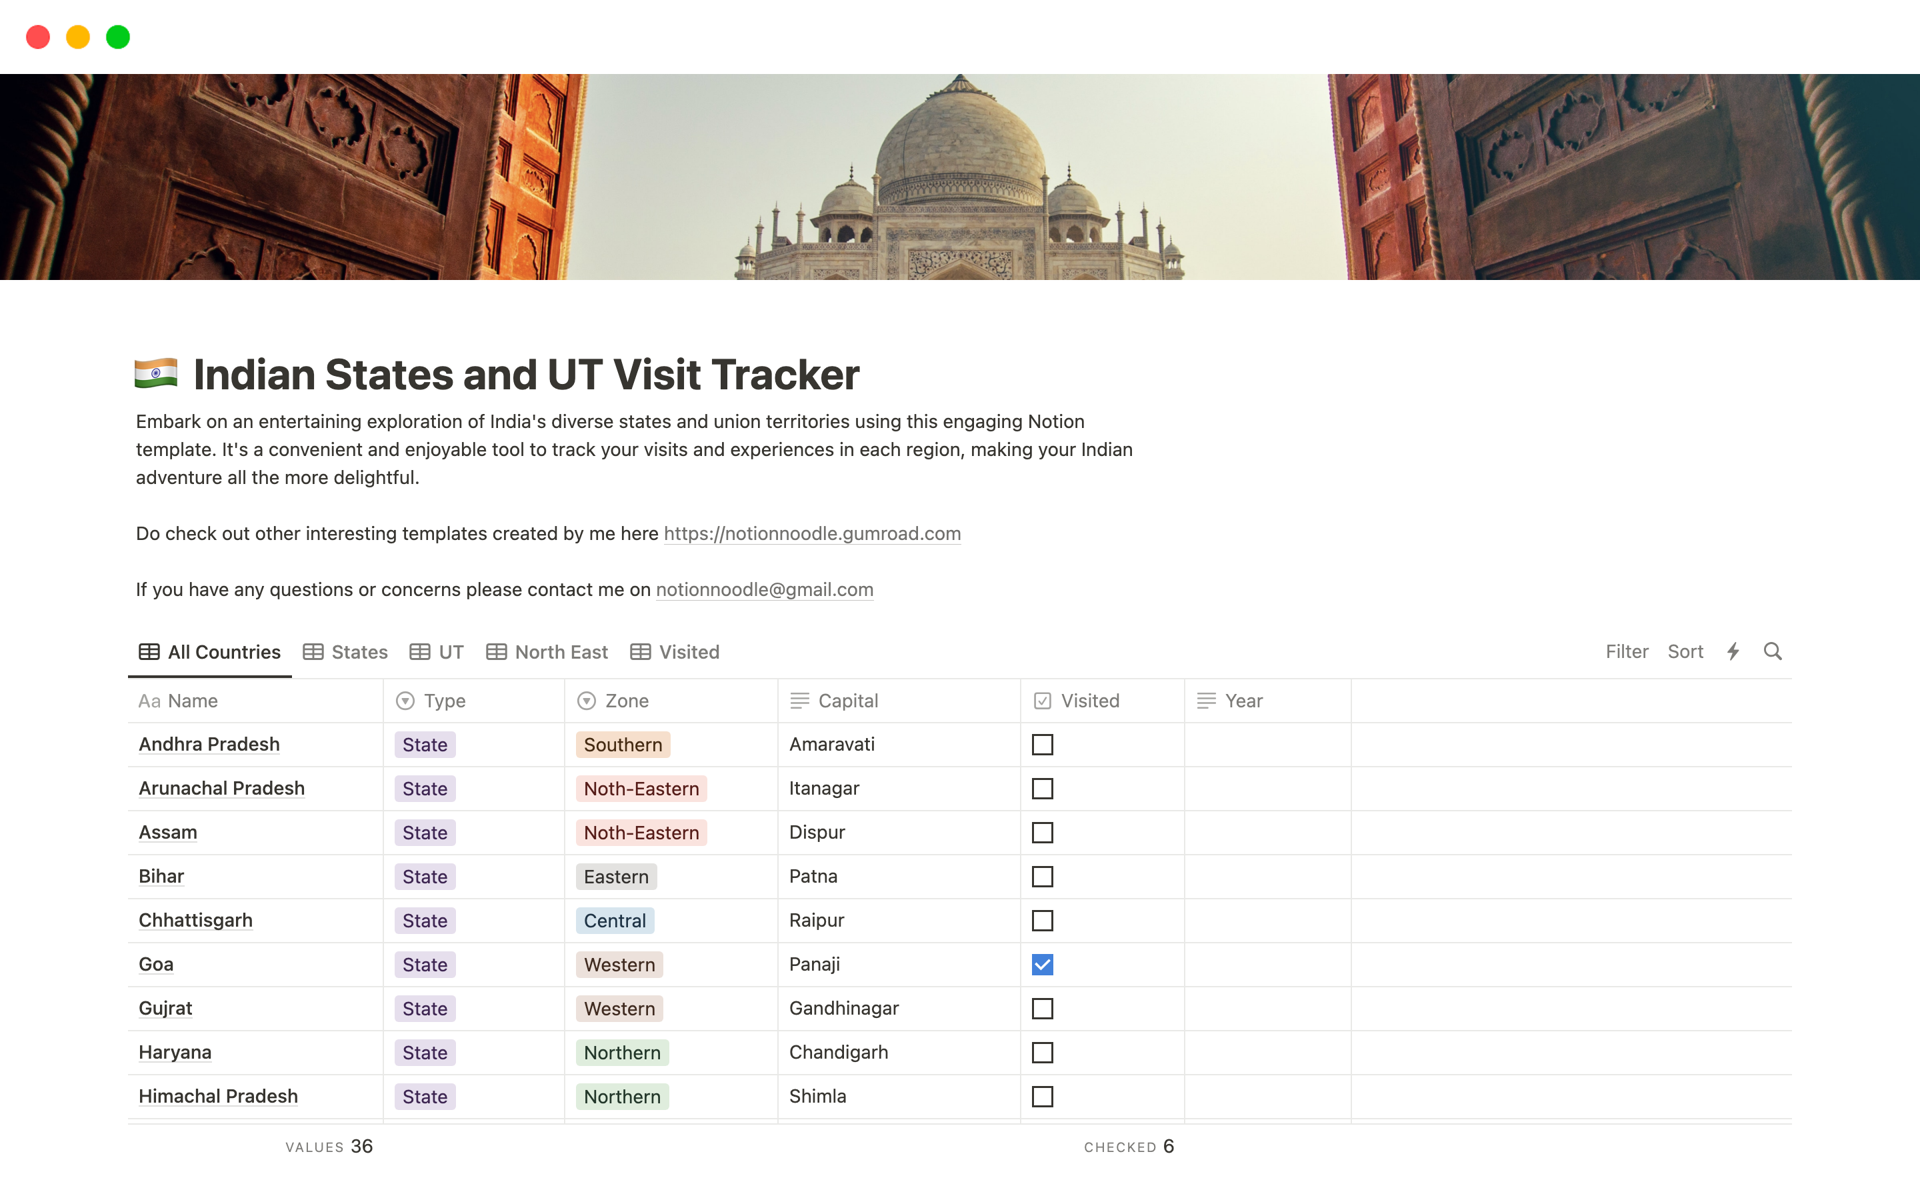 Track your visit to each of these Indian states and union territories.